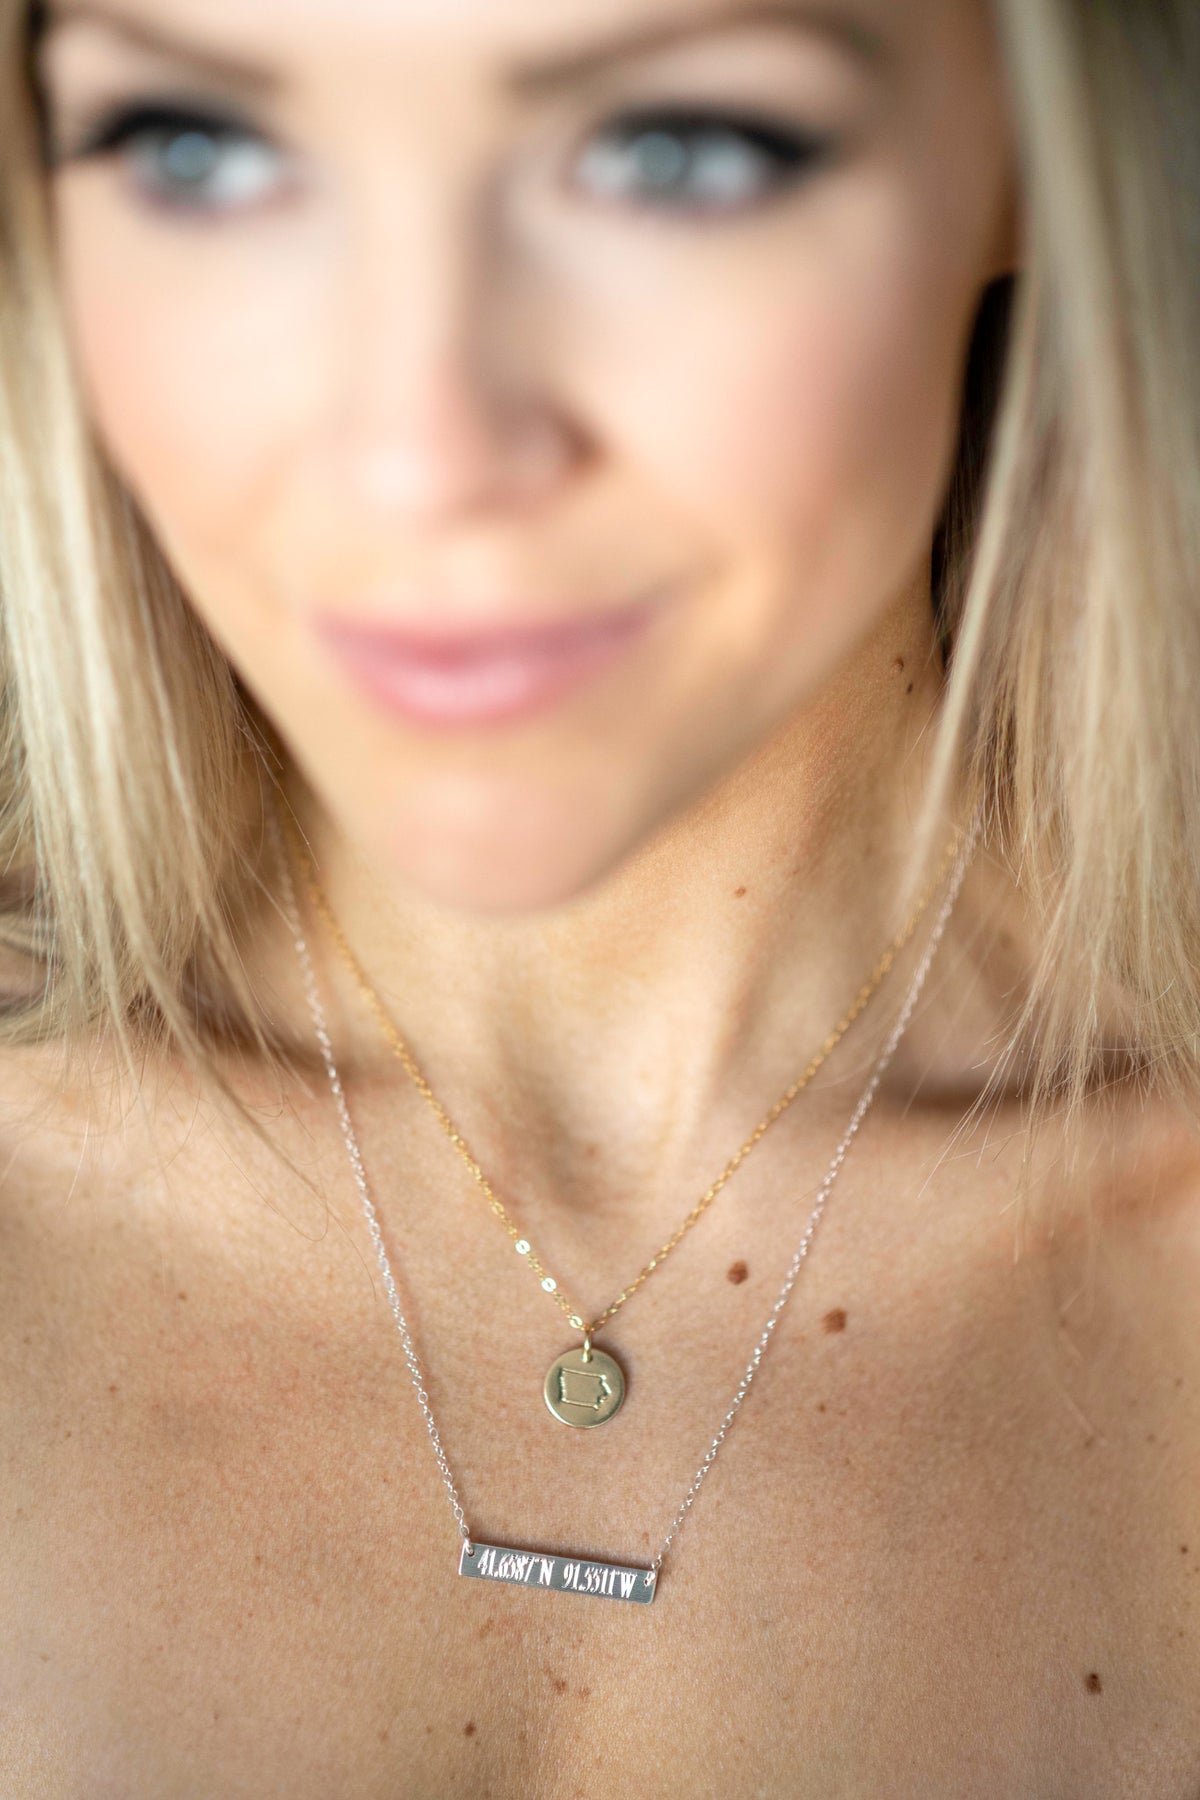 The Stefanie Coordinates Necklace Inspired by Laura VandeBerg